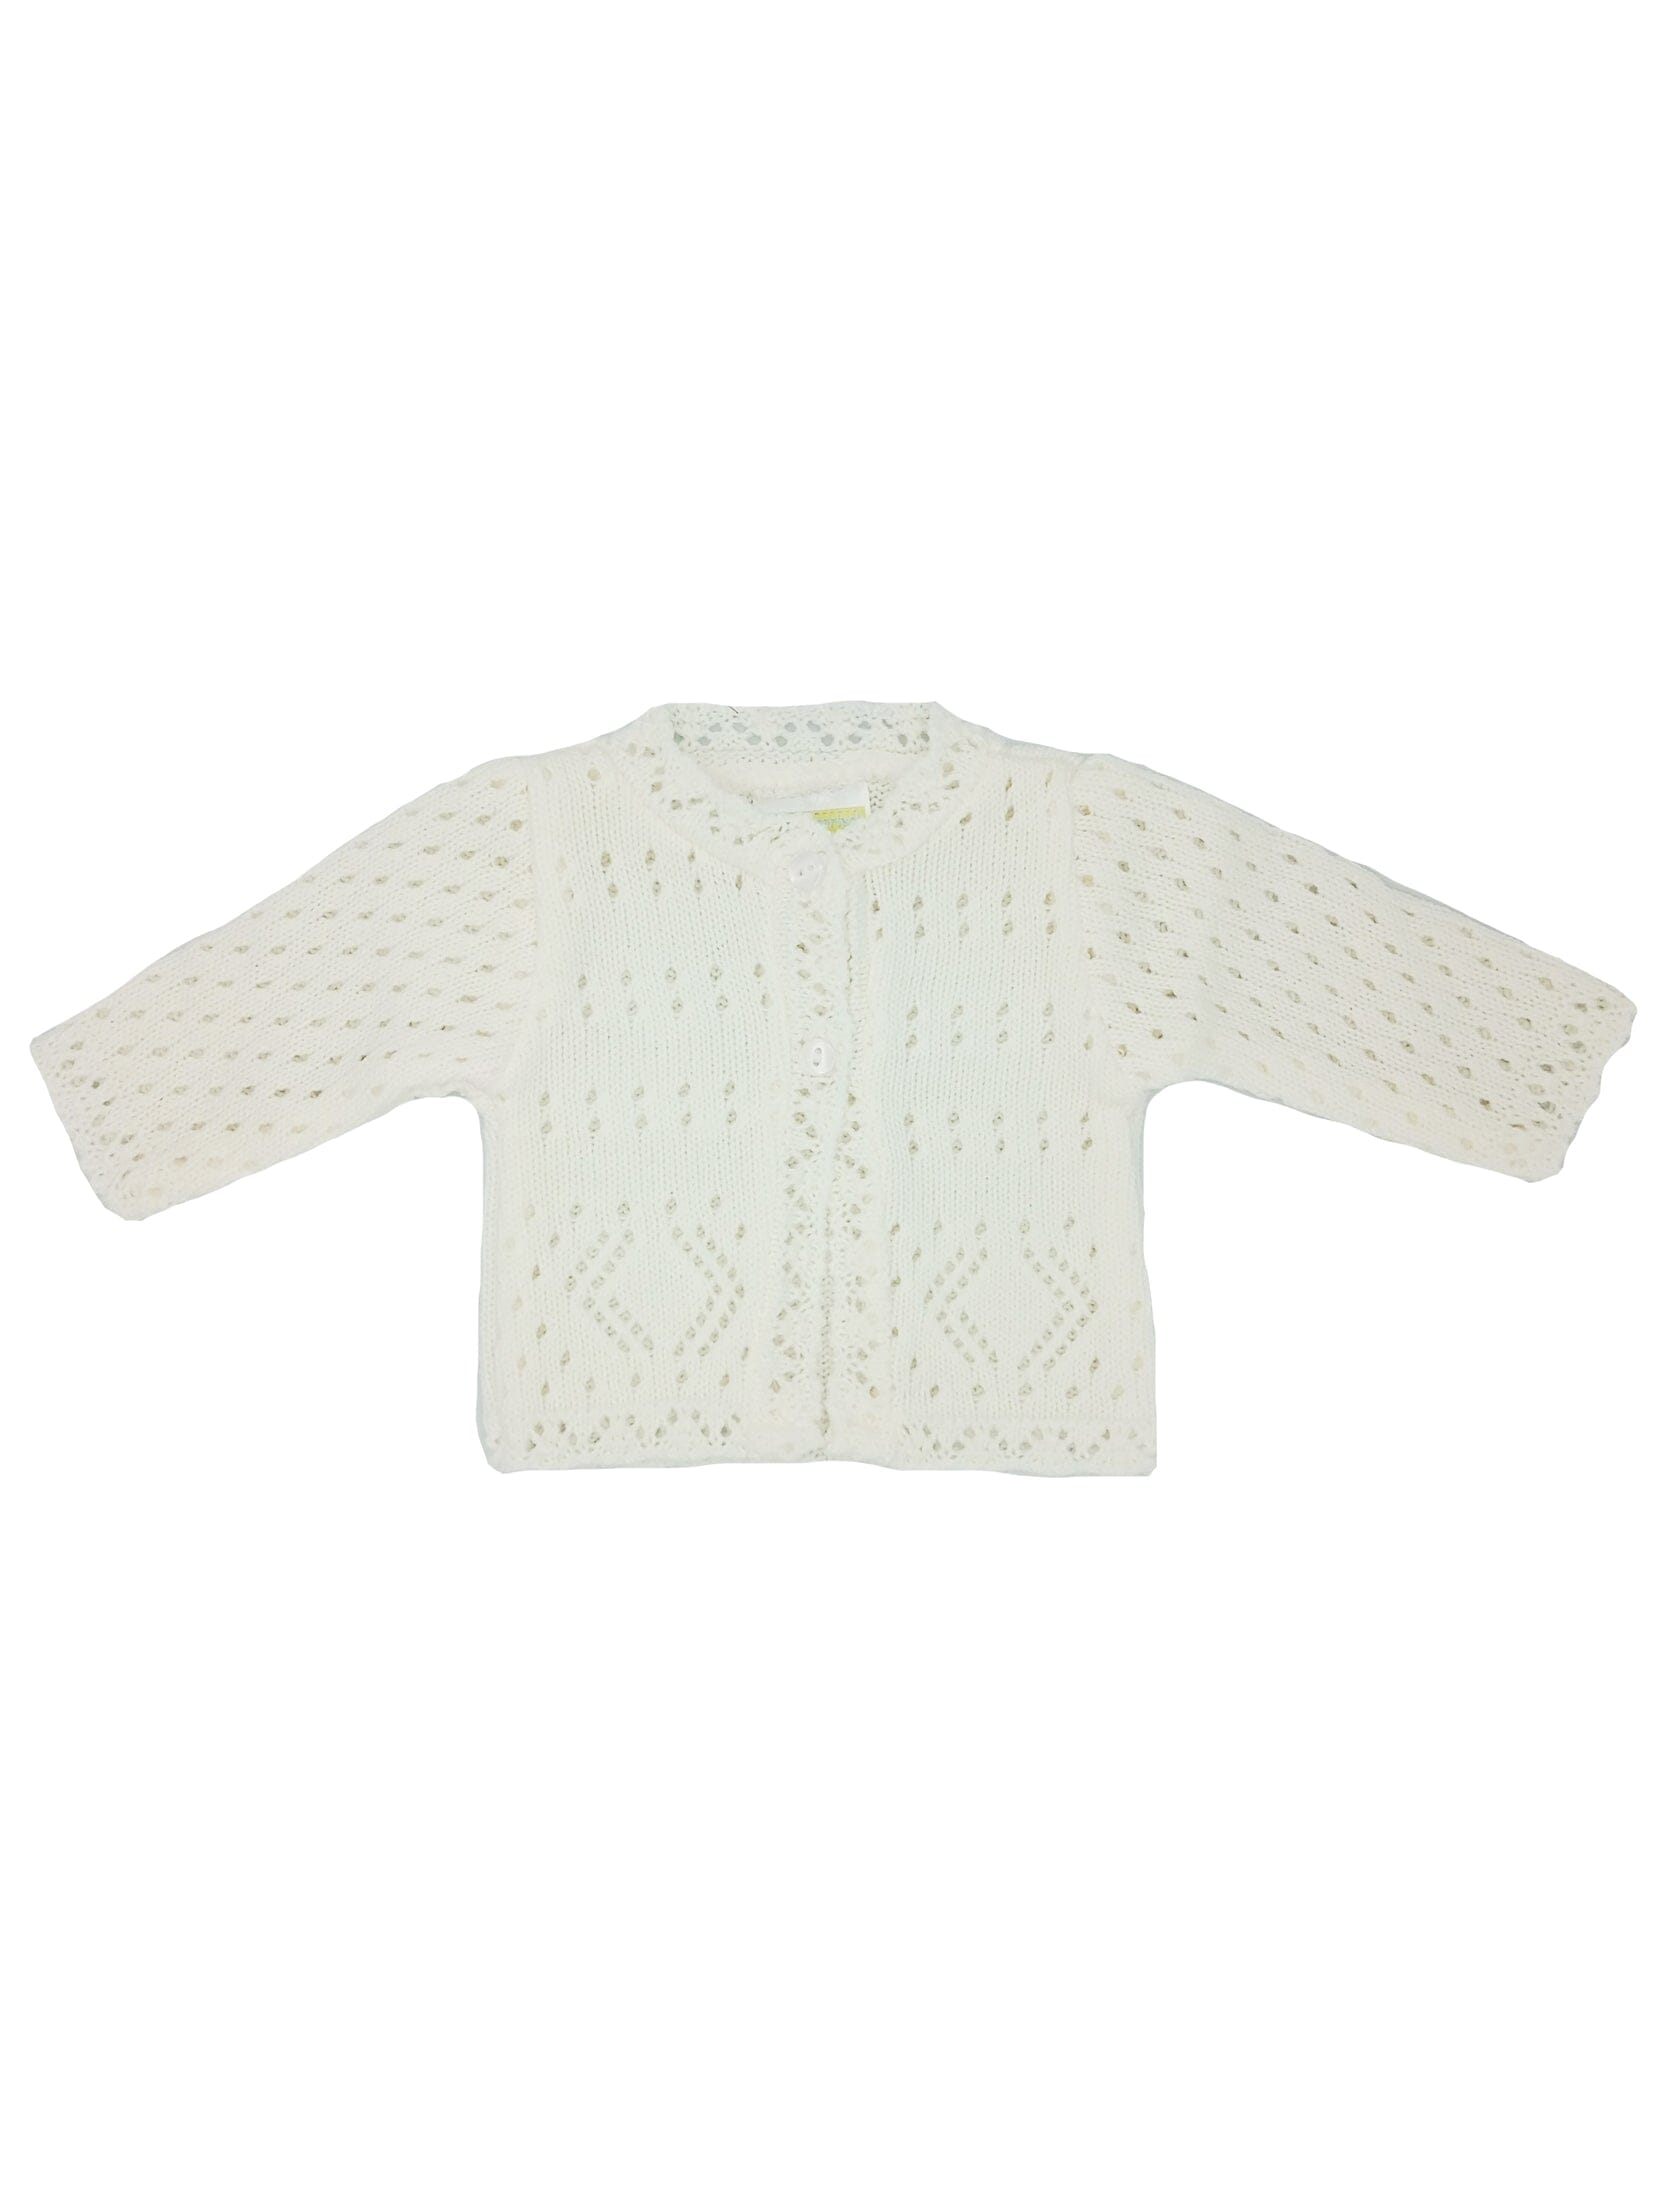 White Pointelle Cardigan - Cardigan / Jacket - Early Arrival